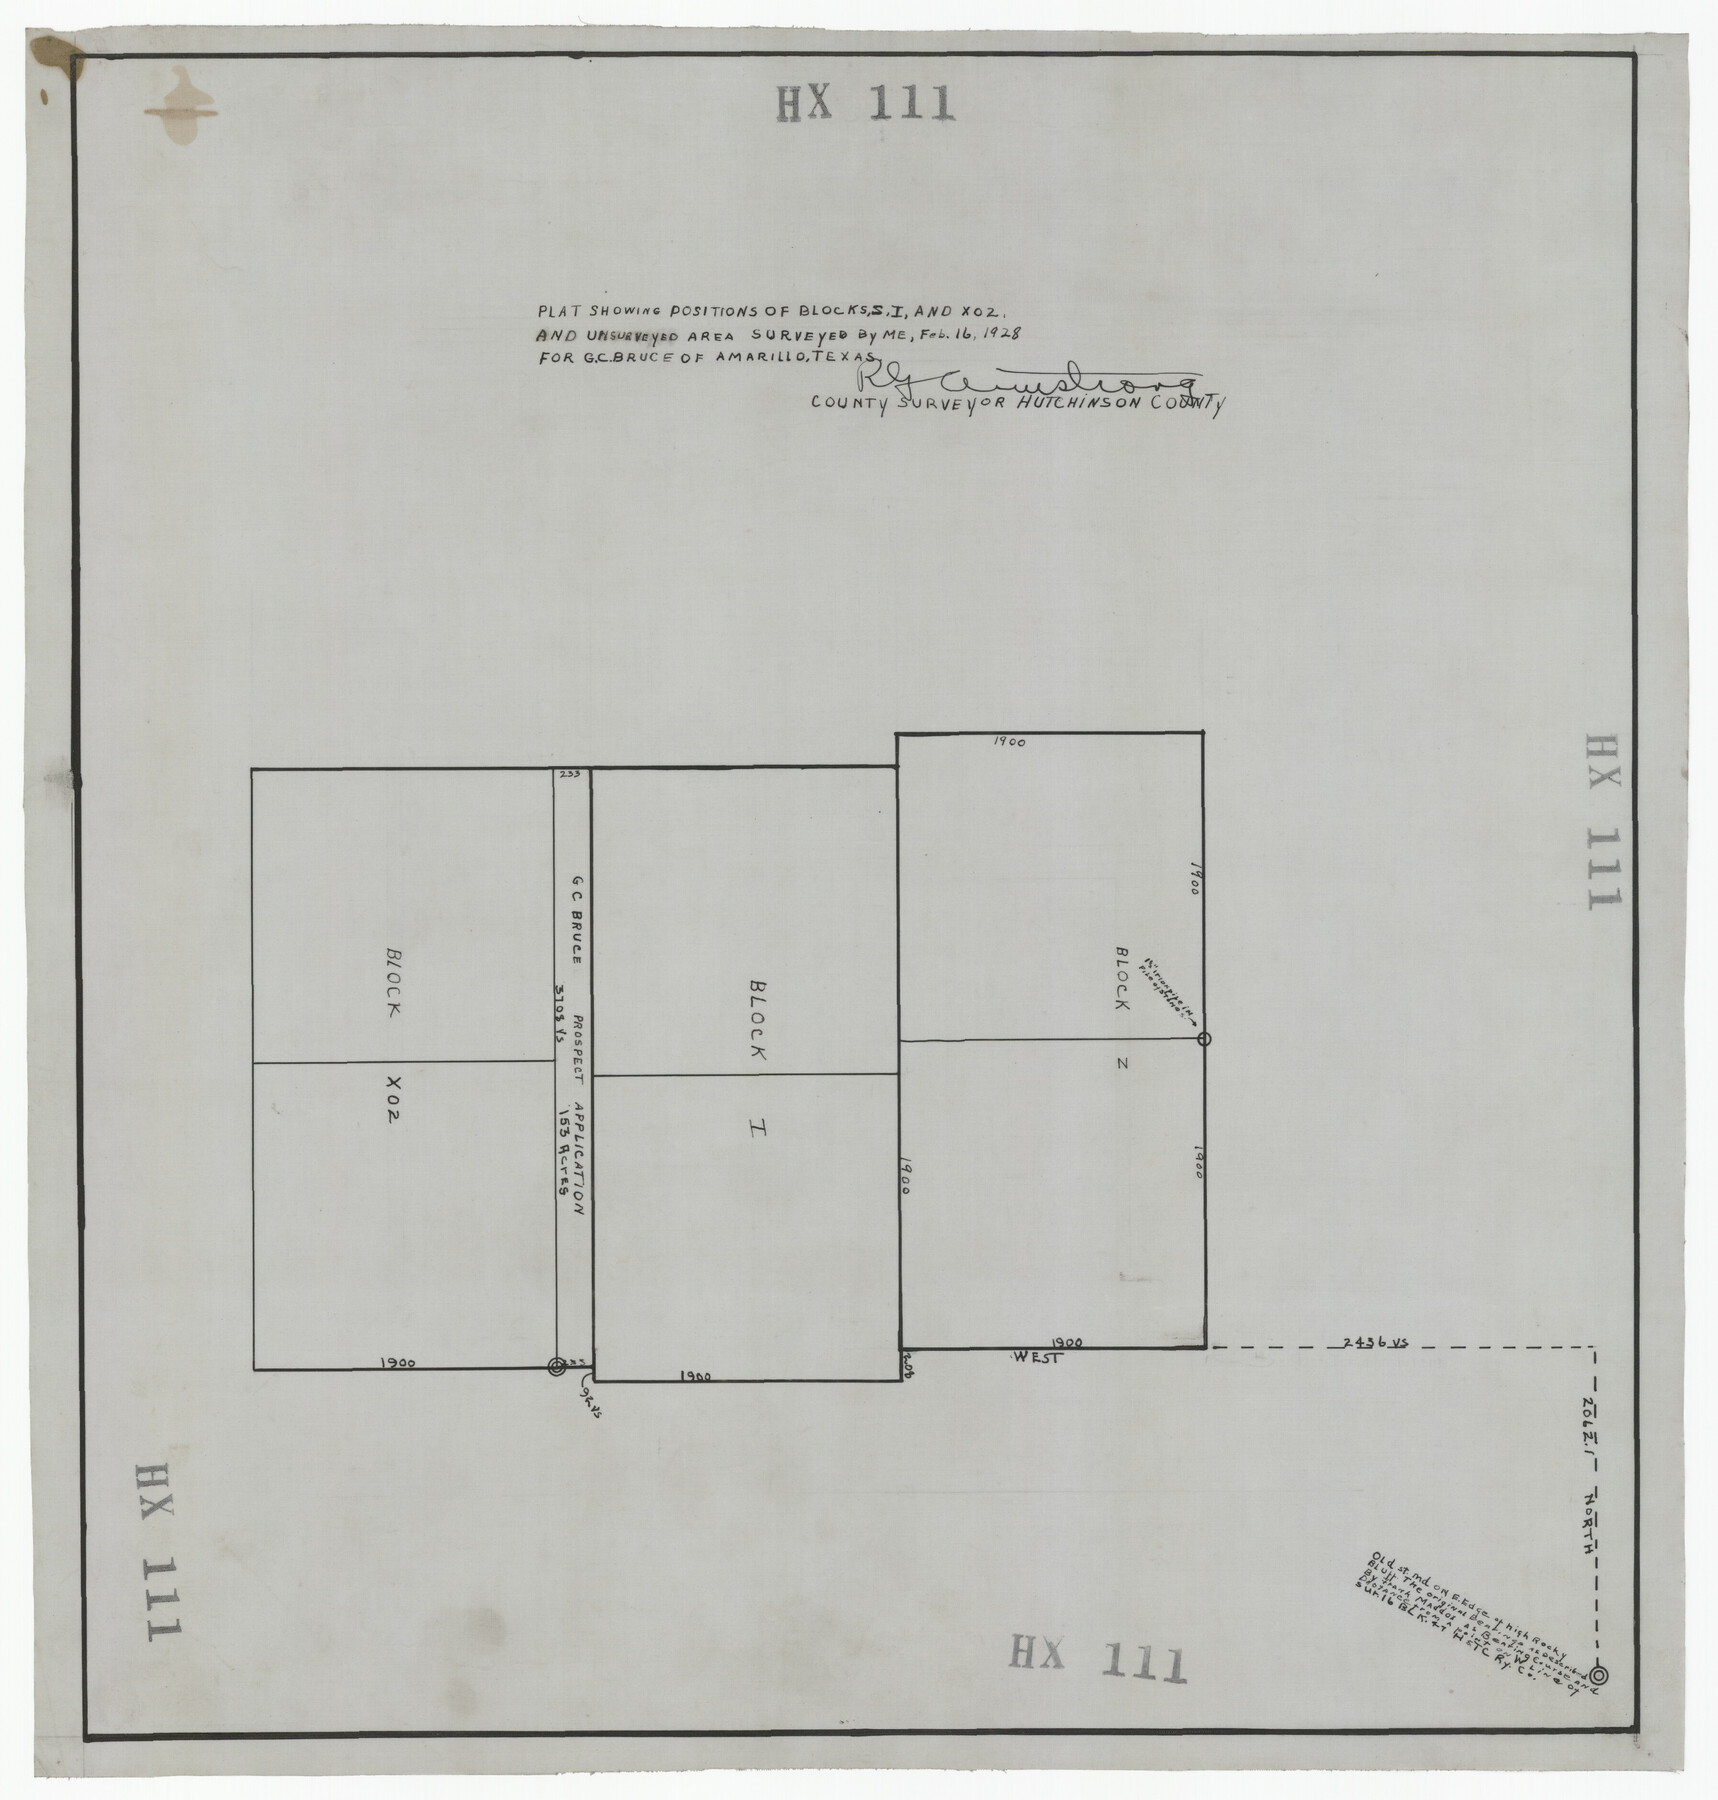 92194, Plat Showing Positions of Blocks S, I, and X02 and Unsurveyed Area, Twichell Survey Records